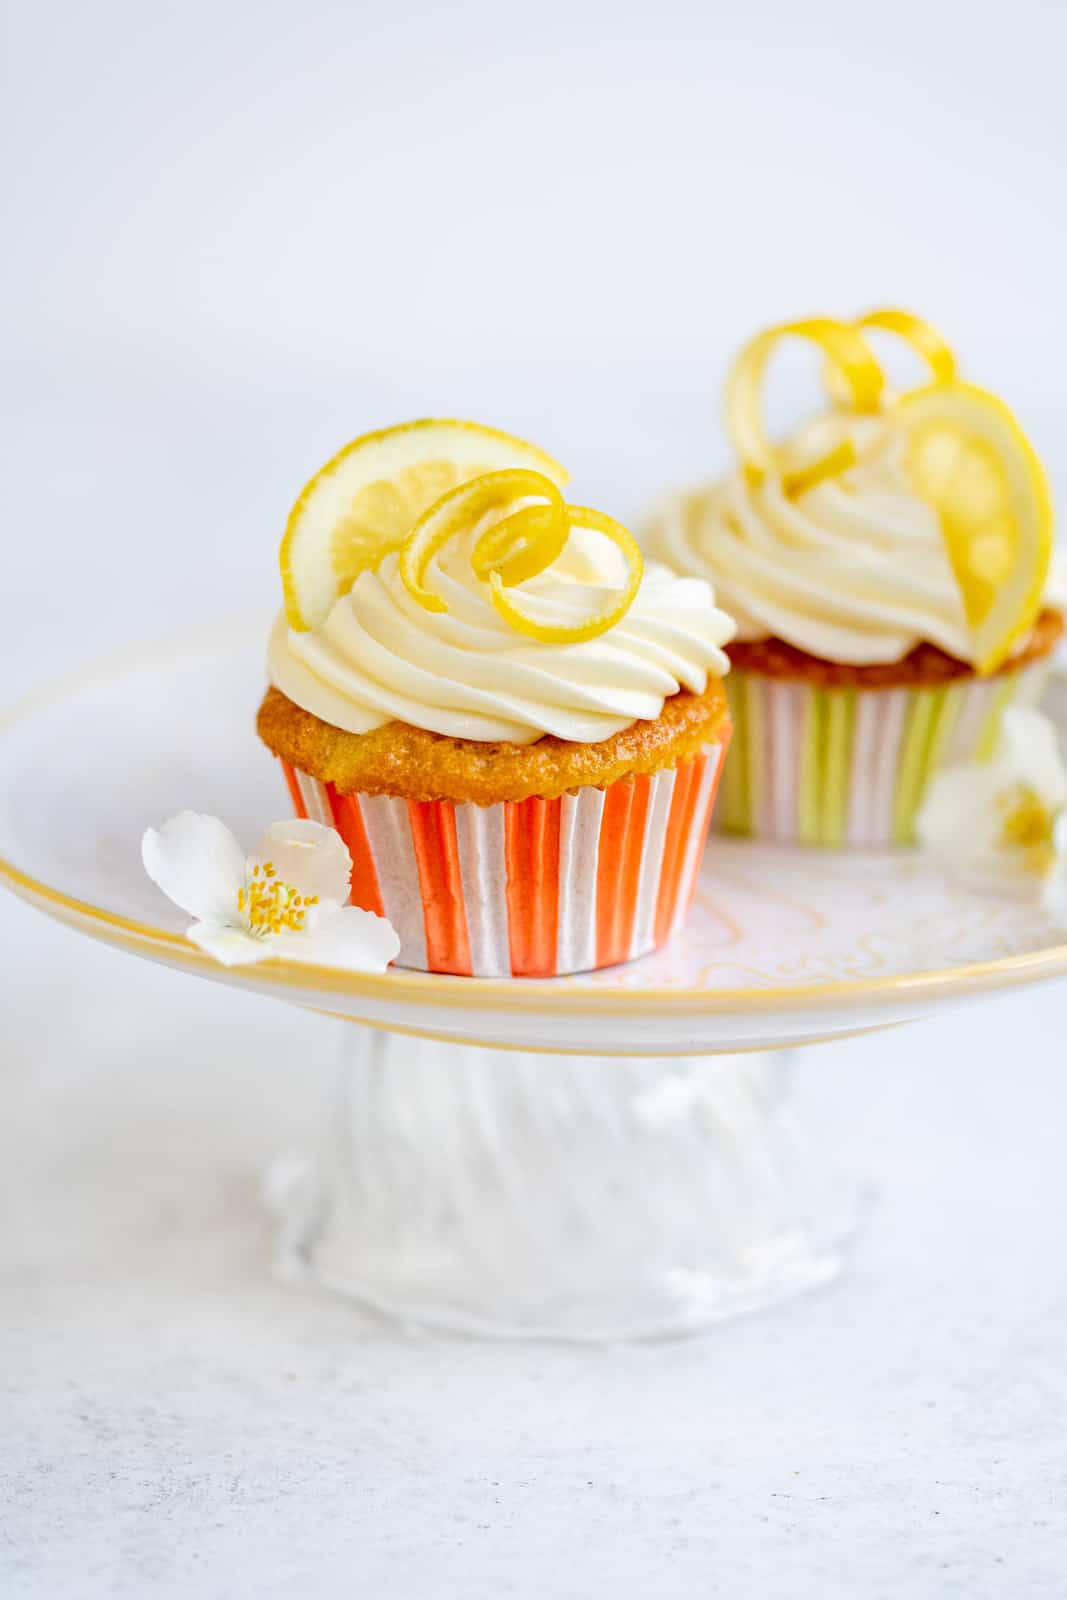 Lemon drizzle cupcakes with cream cheese frosting on a small cake stand